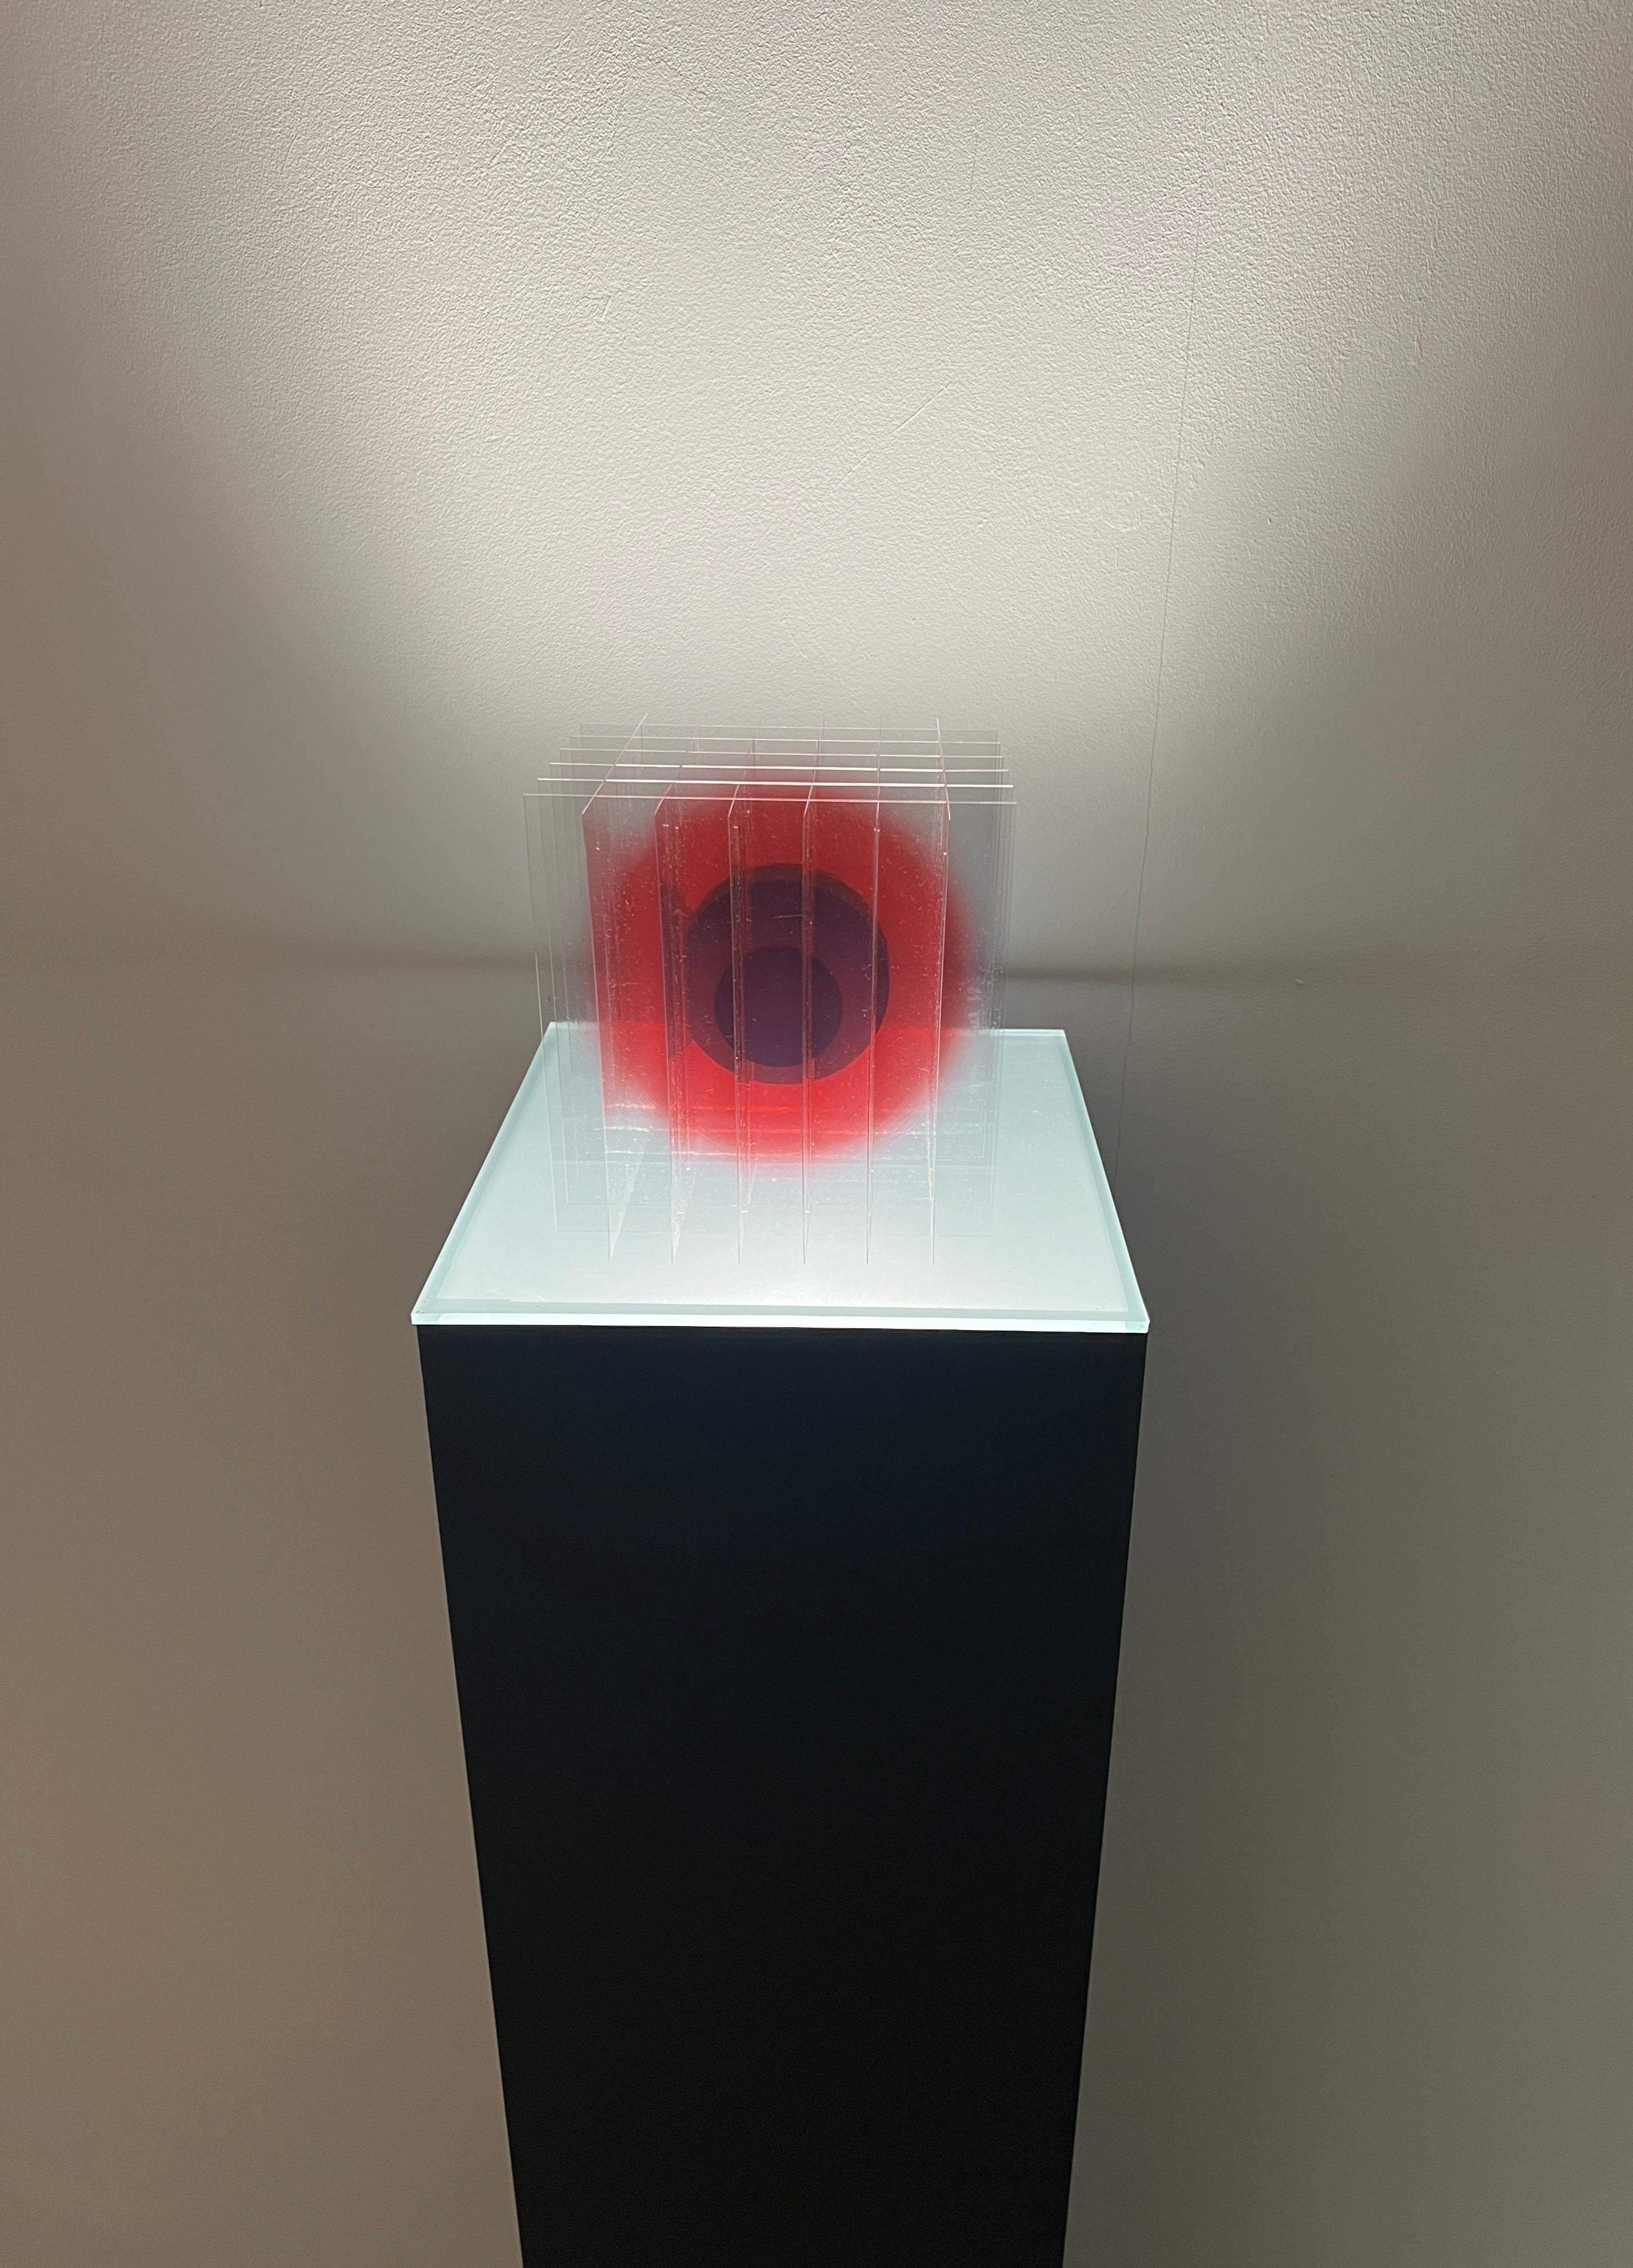 GO SEGAWA Abstract Sculpture - Origami style kinetic art. Optical art. Op art." Life red". Dessin-Volume".  